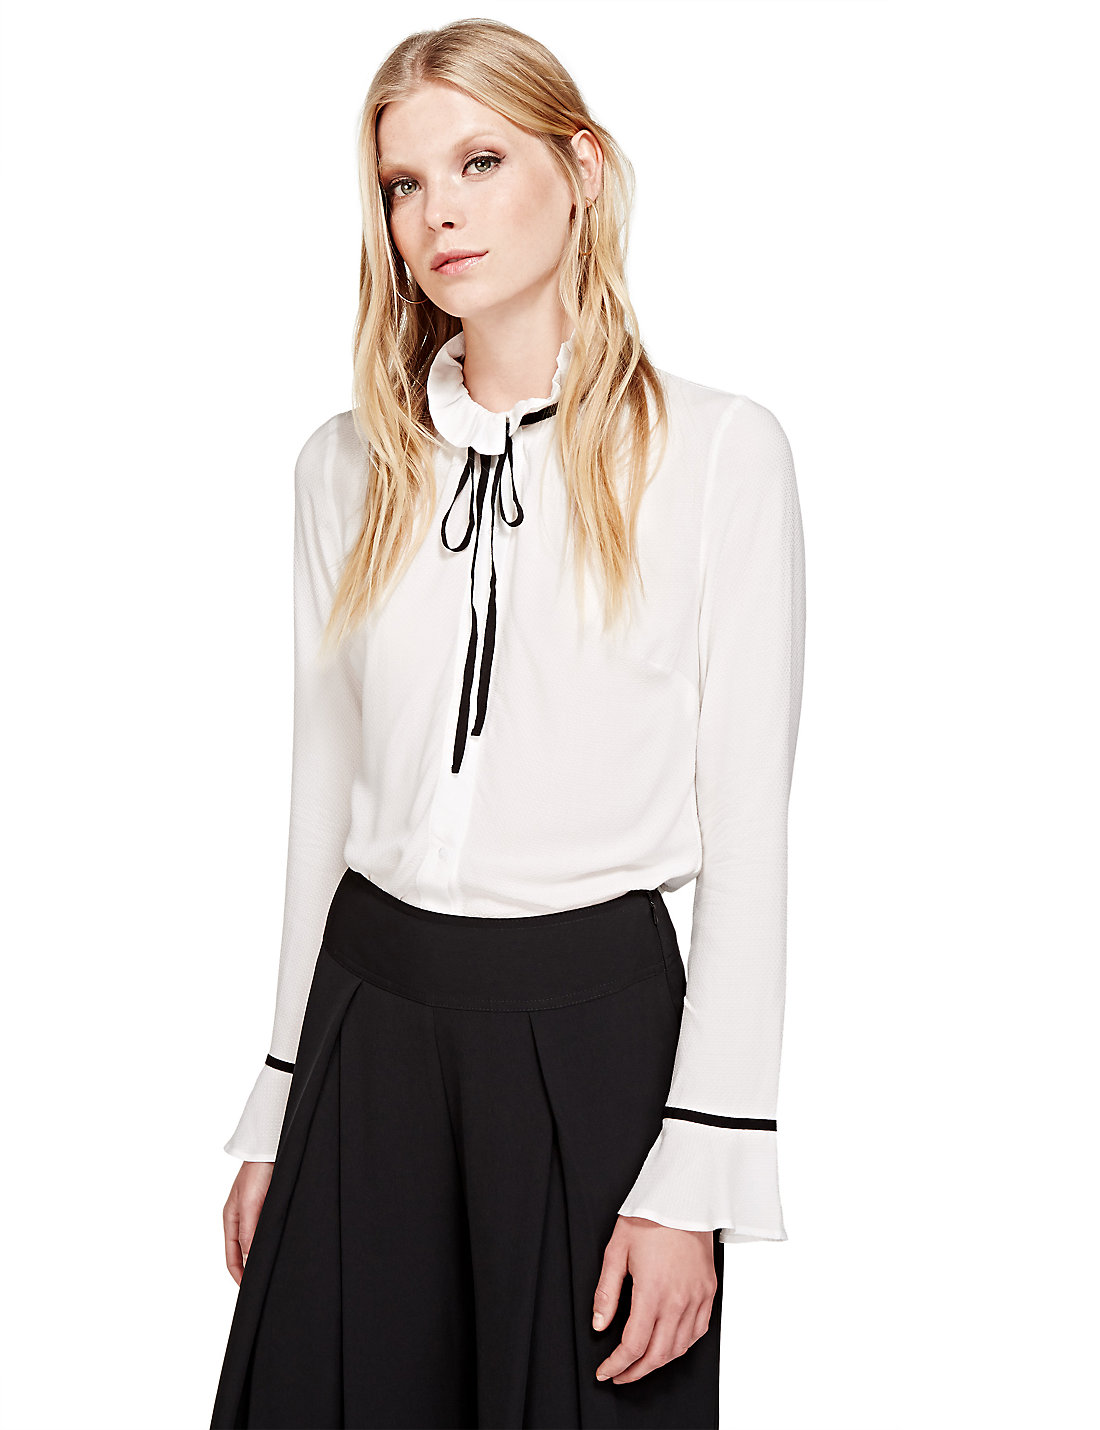 Romantic Tie Neck Blouse / Mark‘s and Spencer<br />http://www.marksandspencer.com/romantic-tie-neck-blouse/p/p60074622#